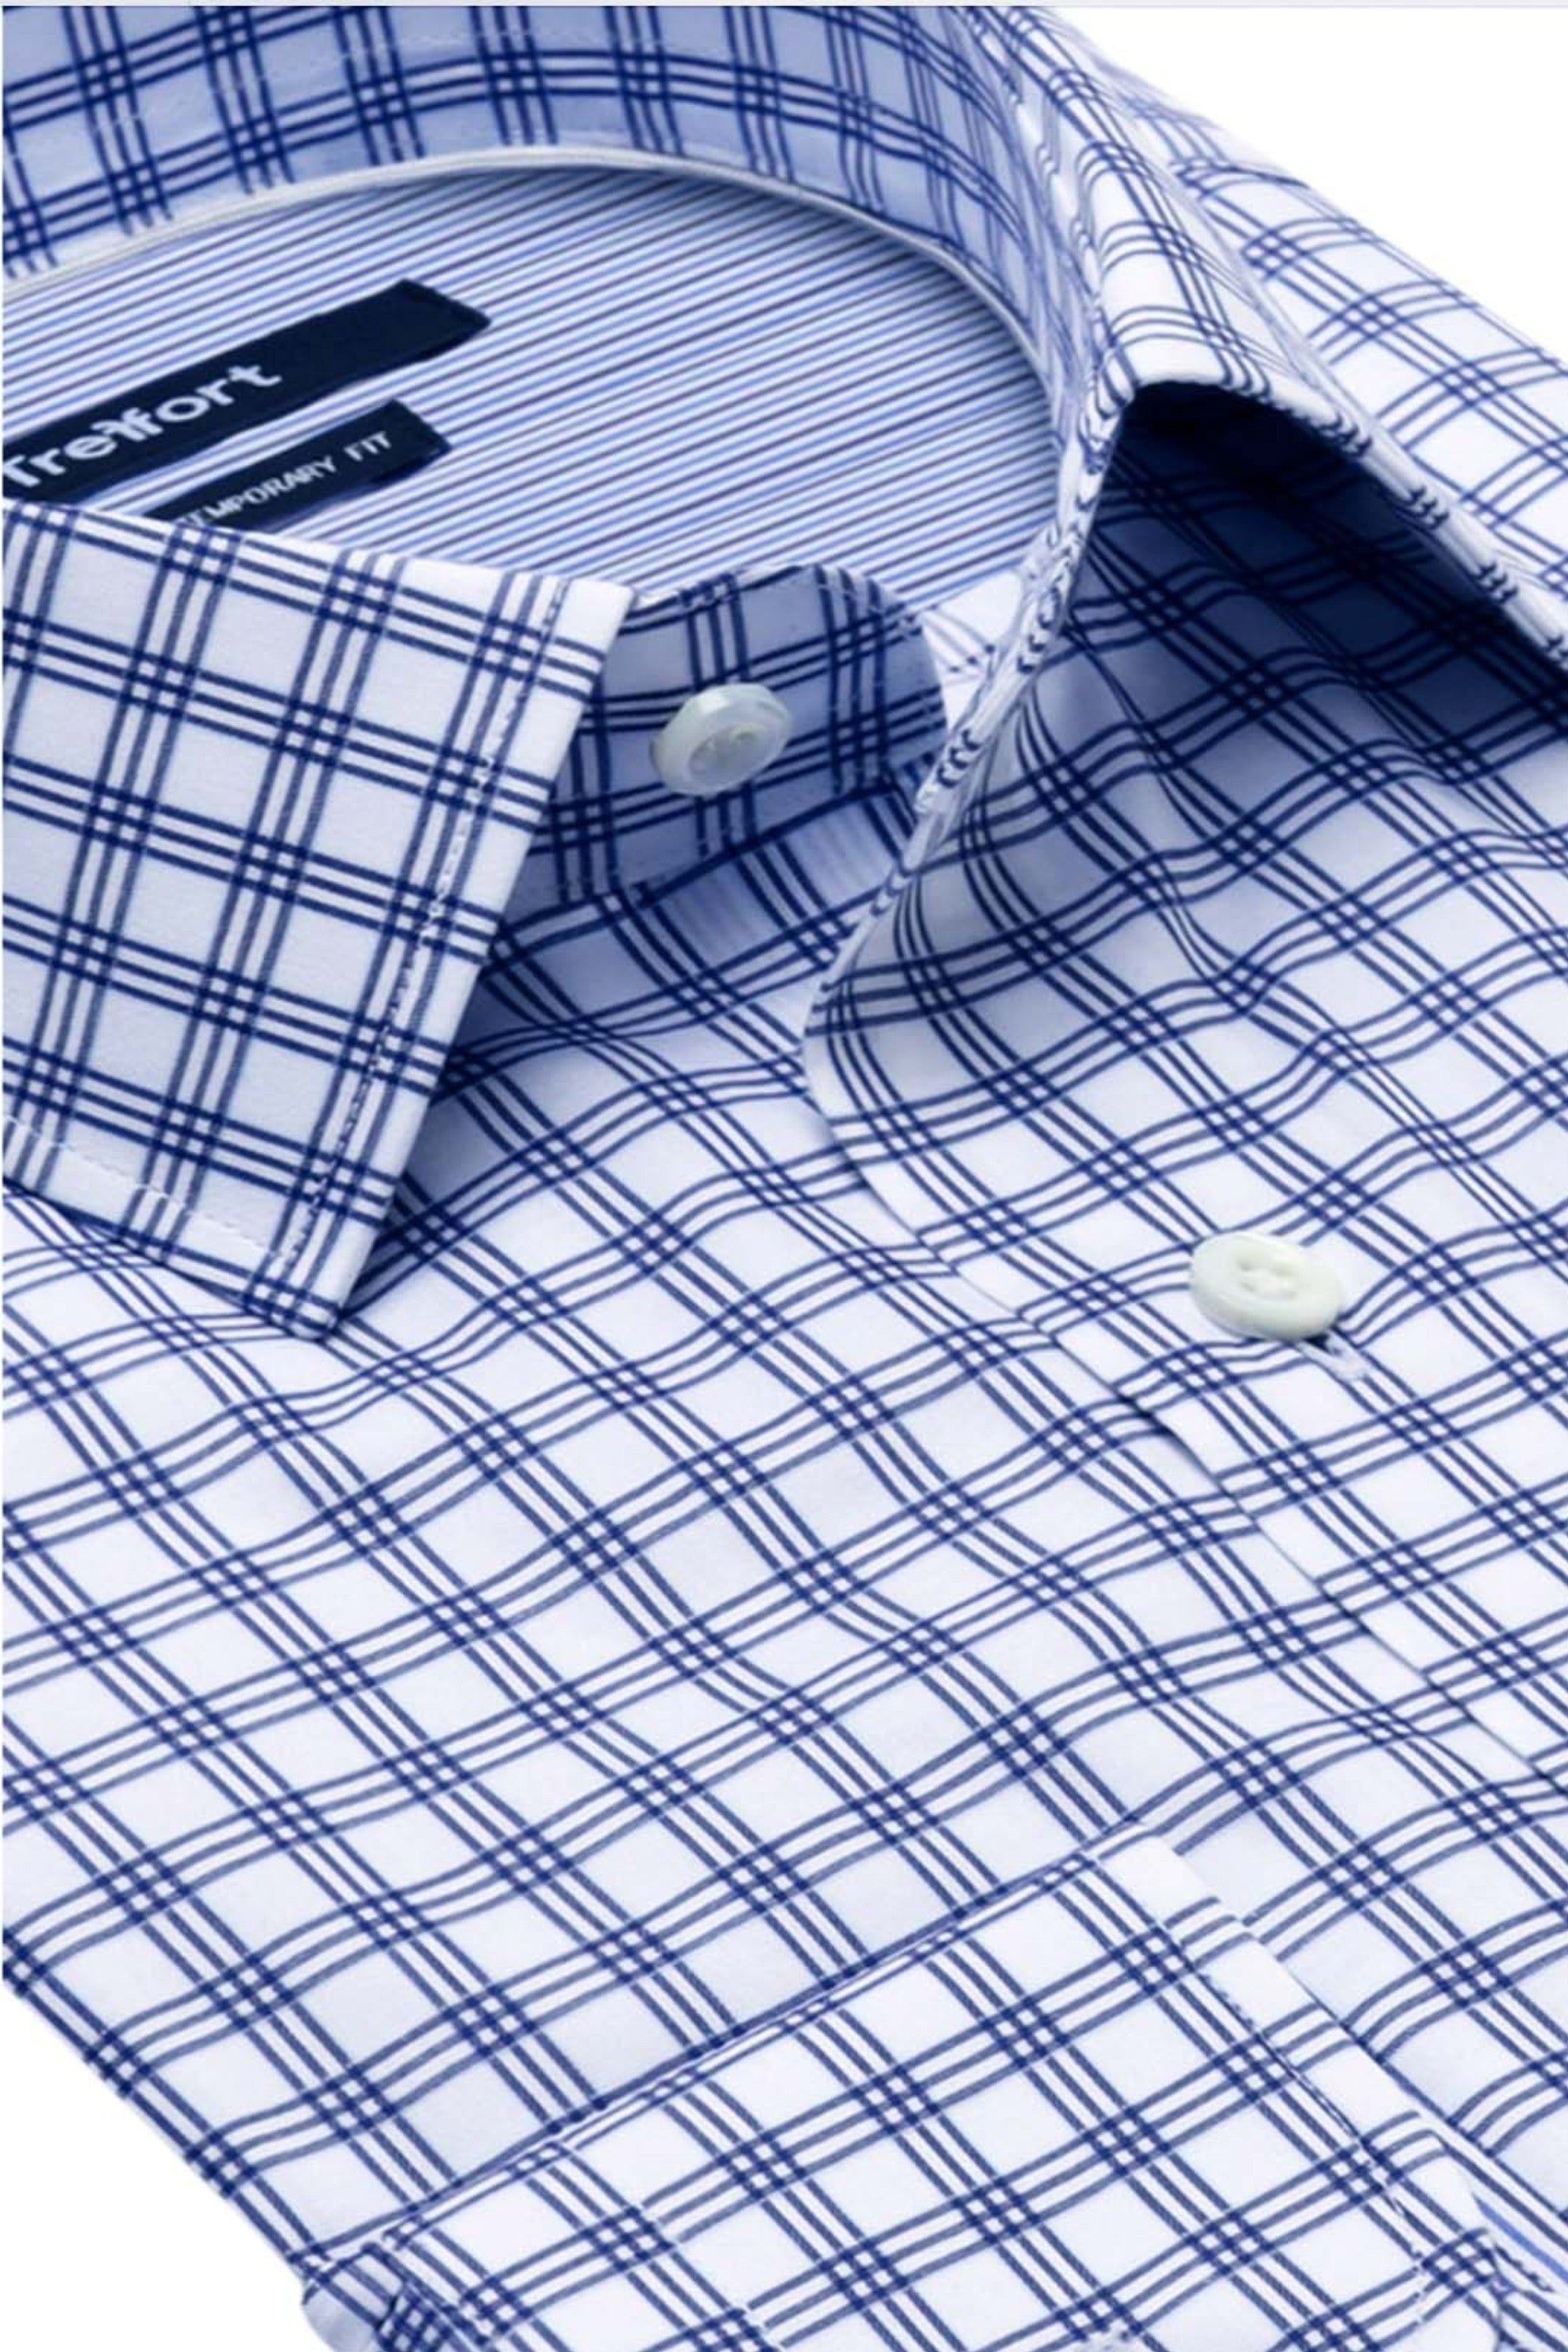 LENOX BLUE CHECKERED BUTTON DOWN DRESS SHIRT - CASUAL /FORMAL EVENT - SIDE VIEW